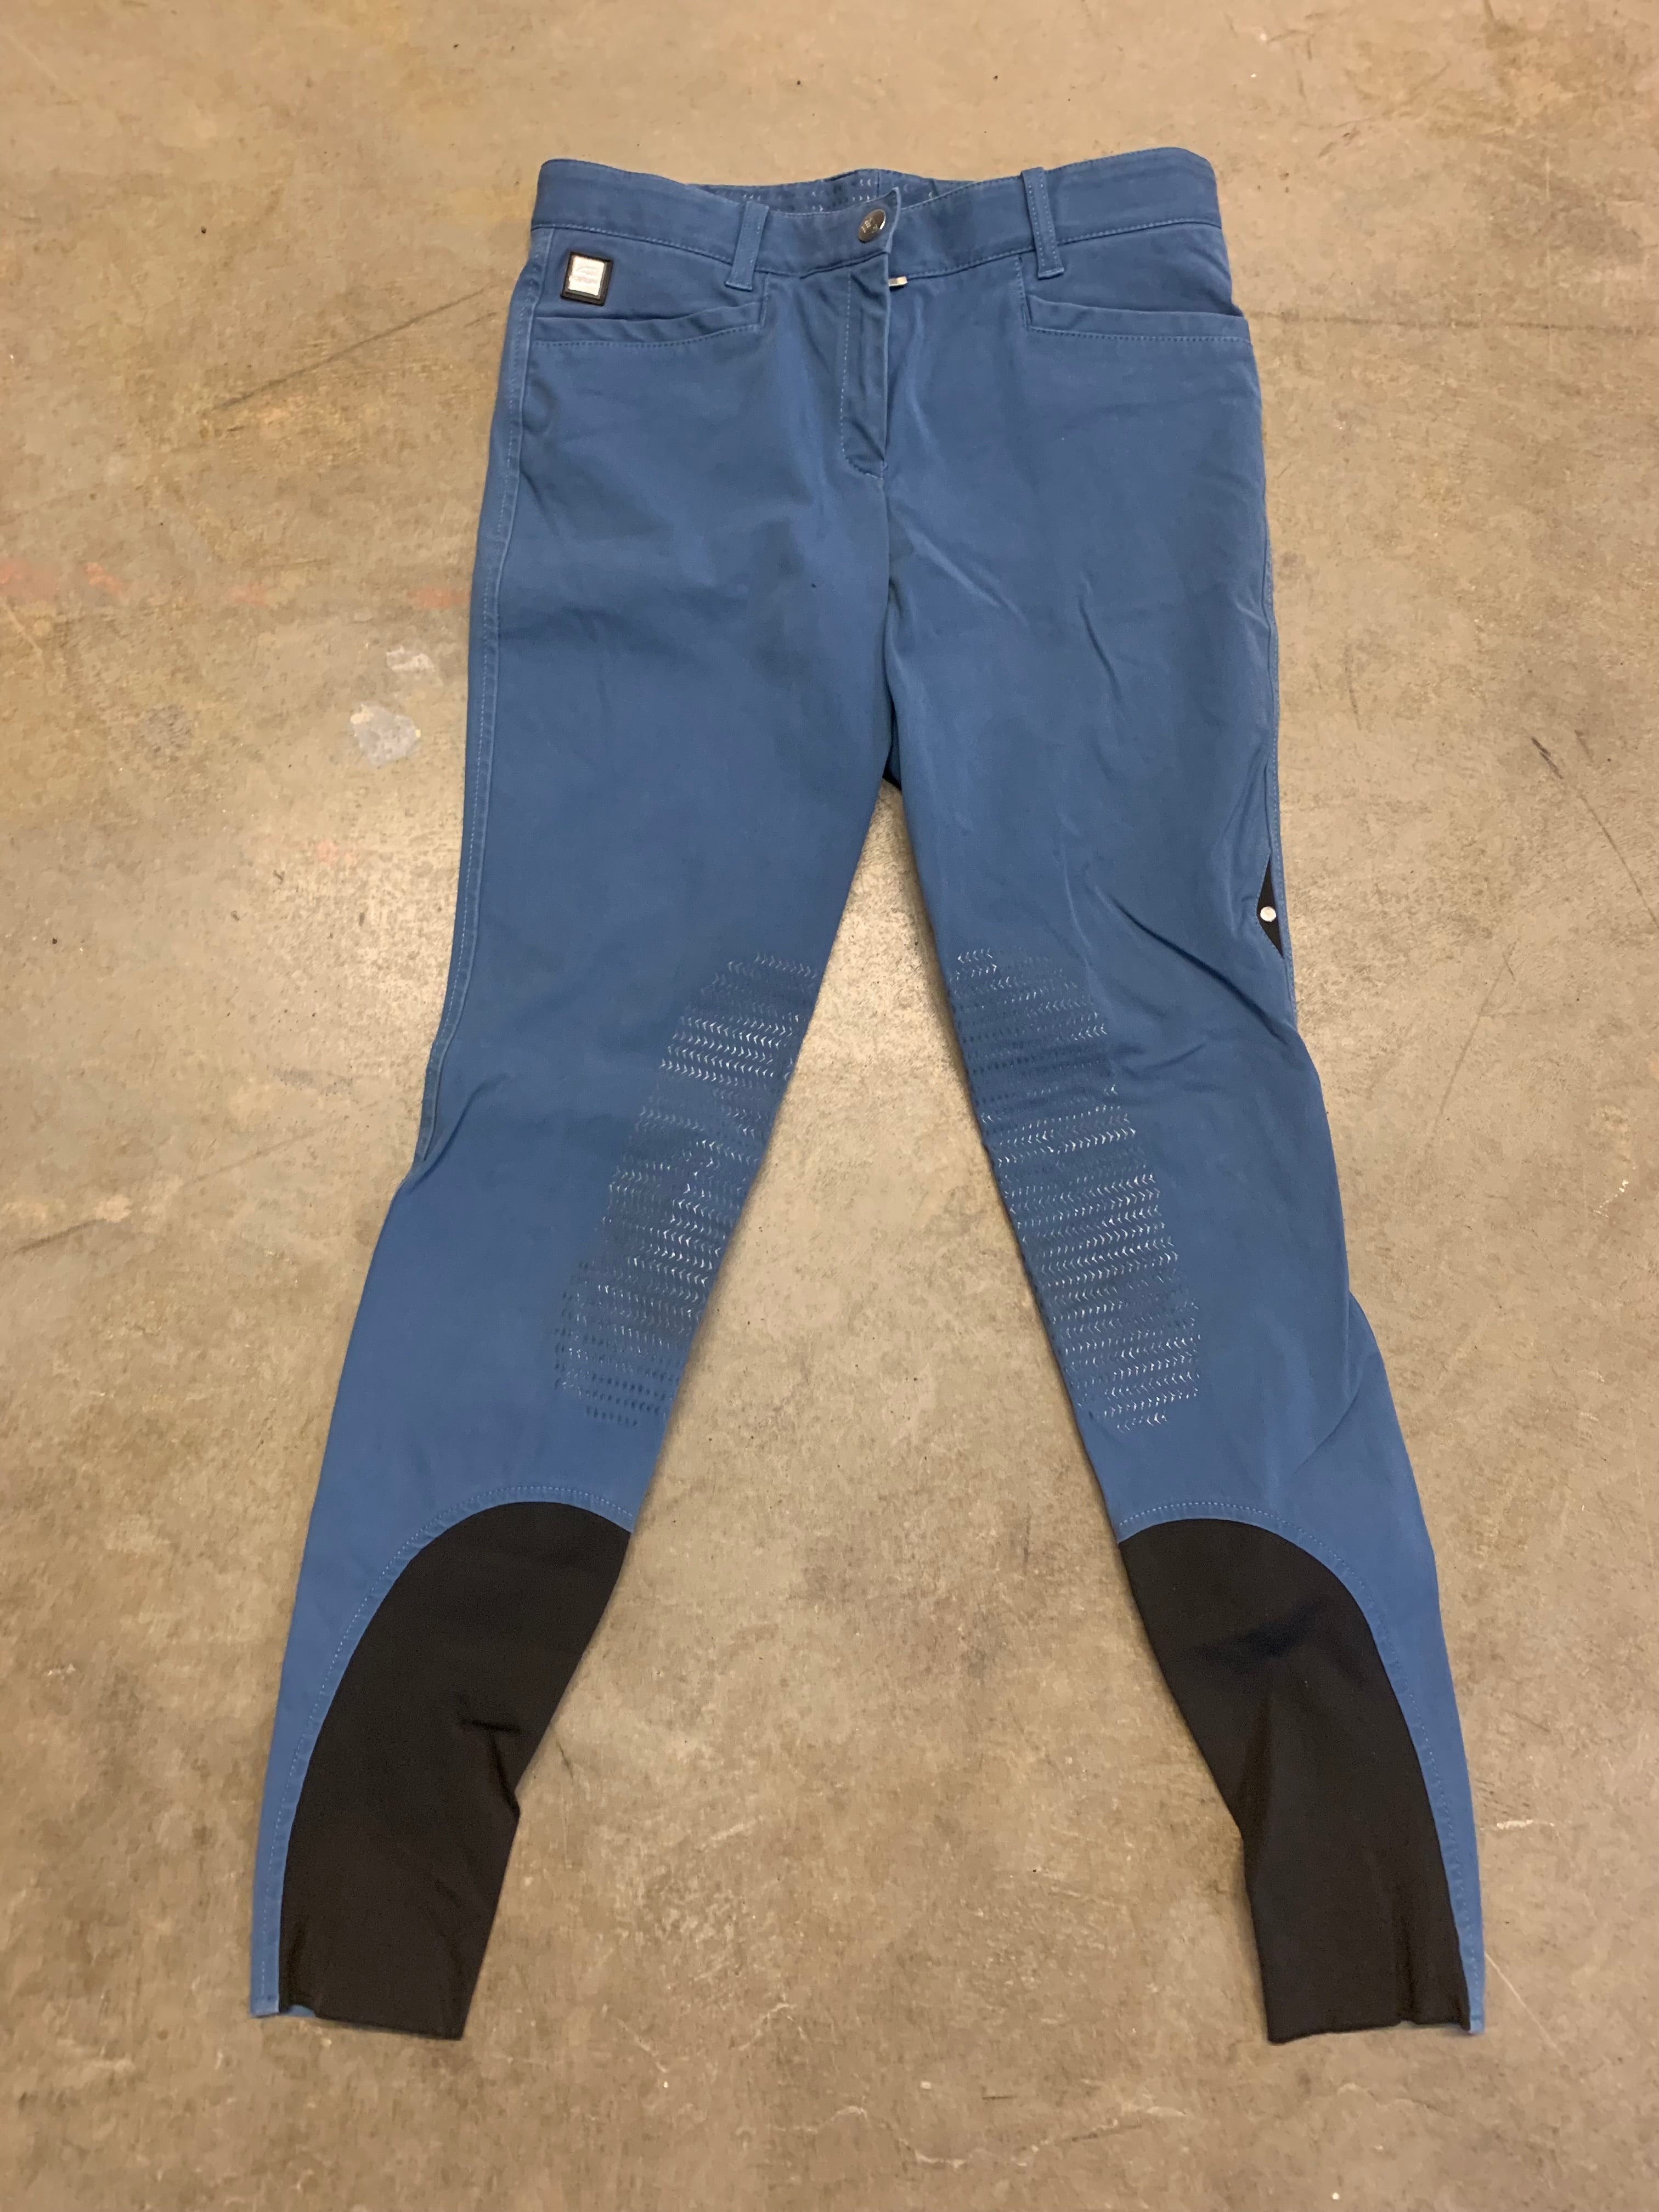 PRE-LOVED EQUILINE ASH KP BREECHES